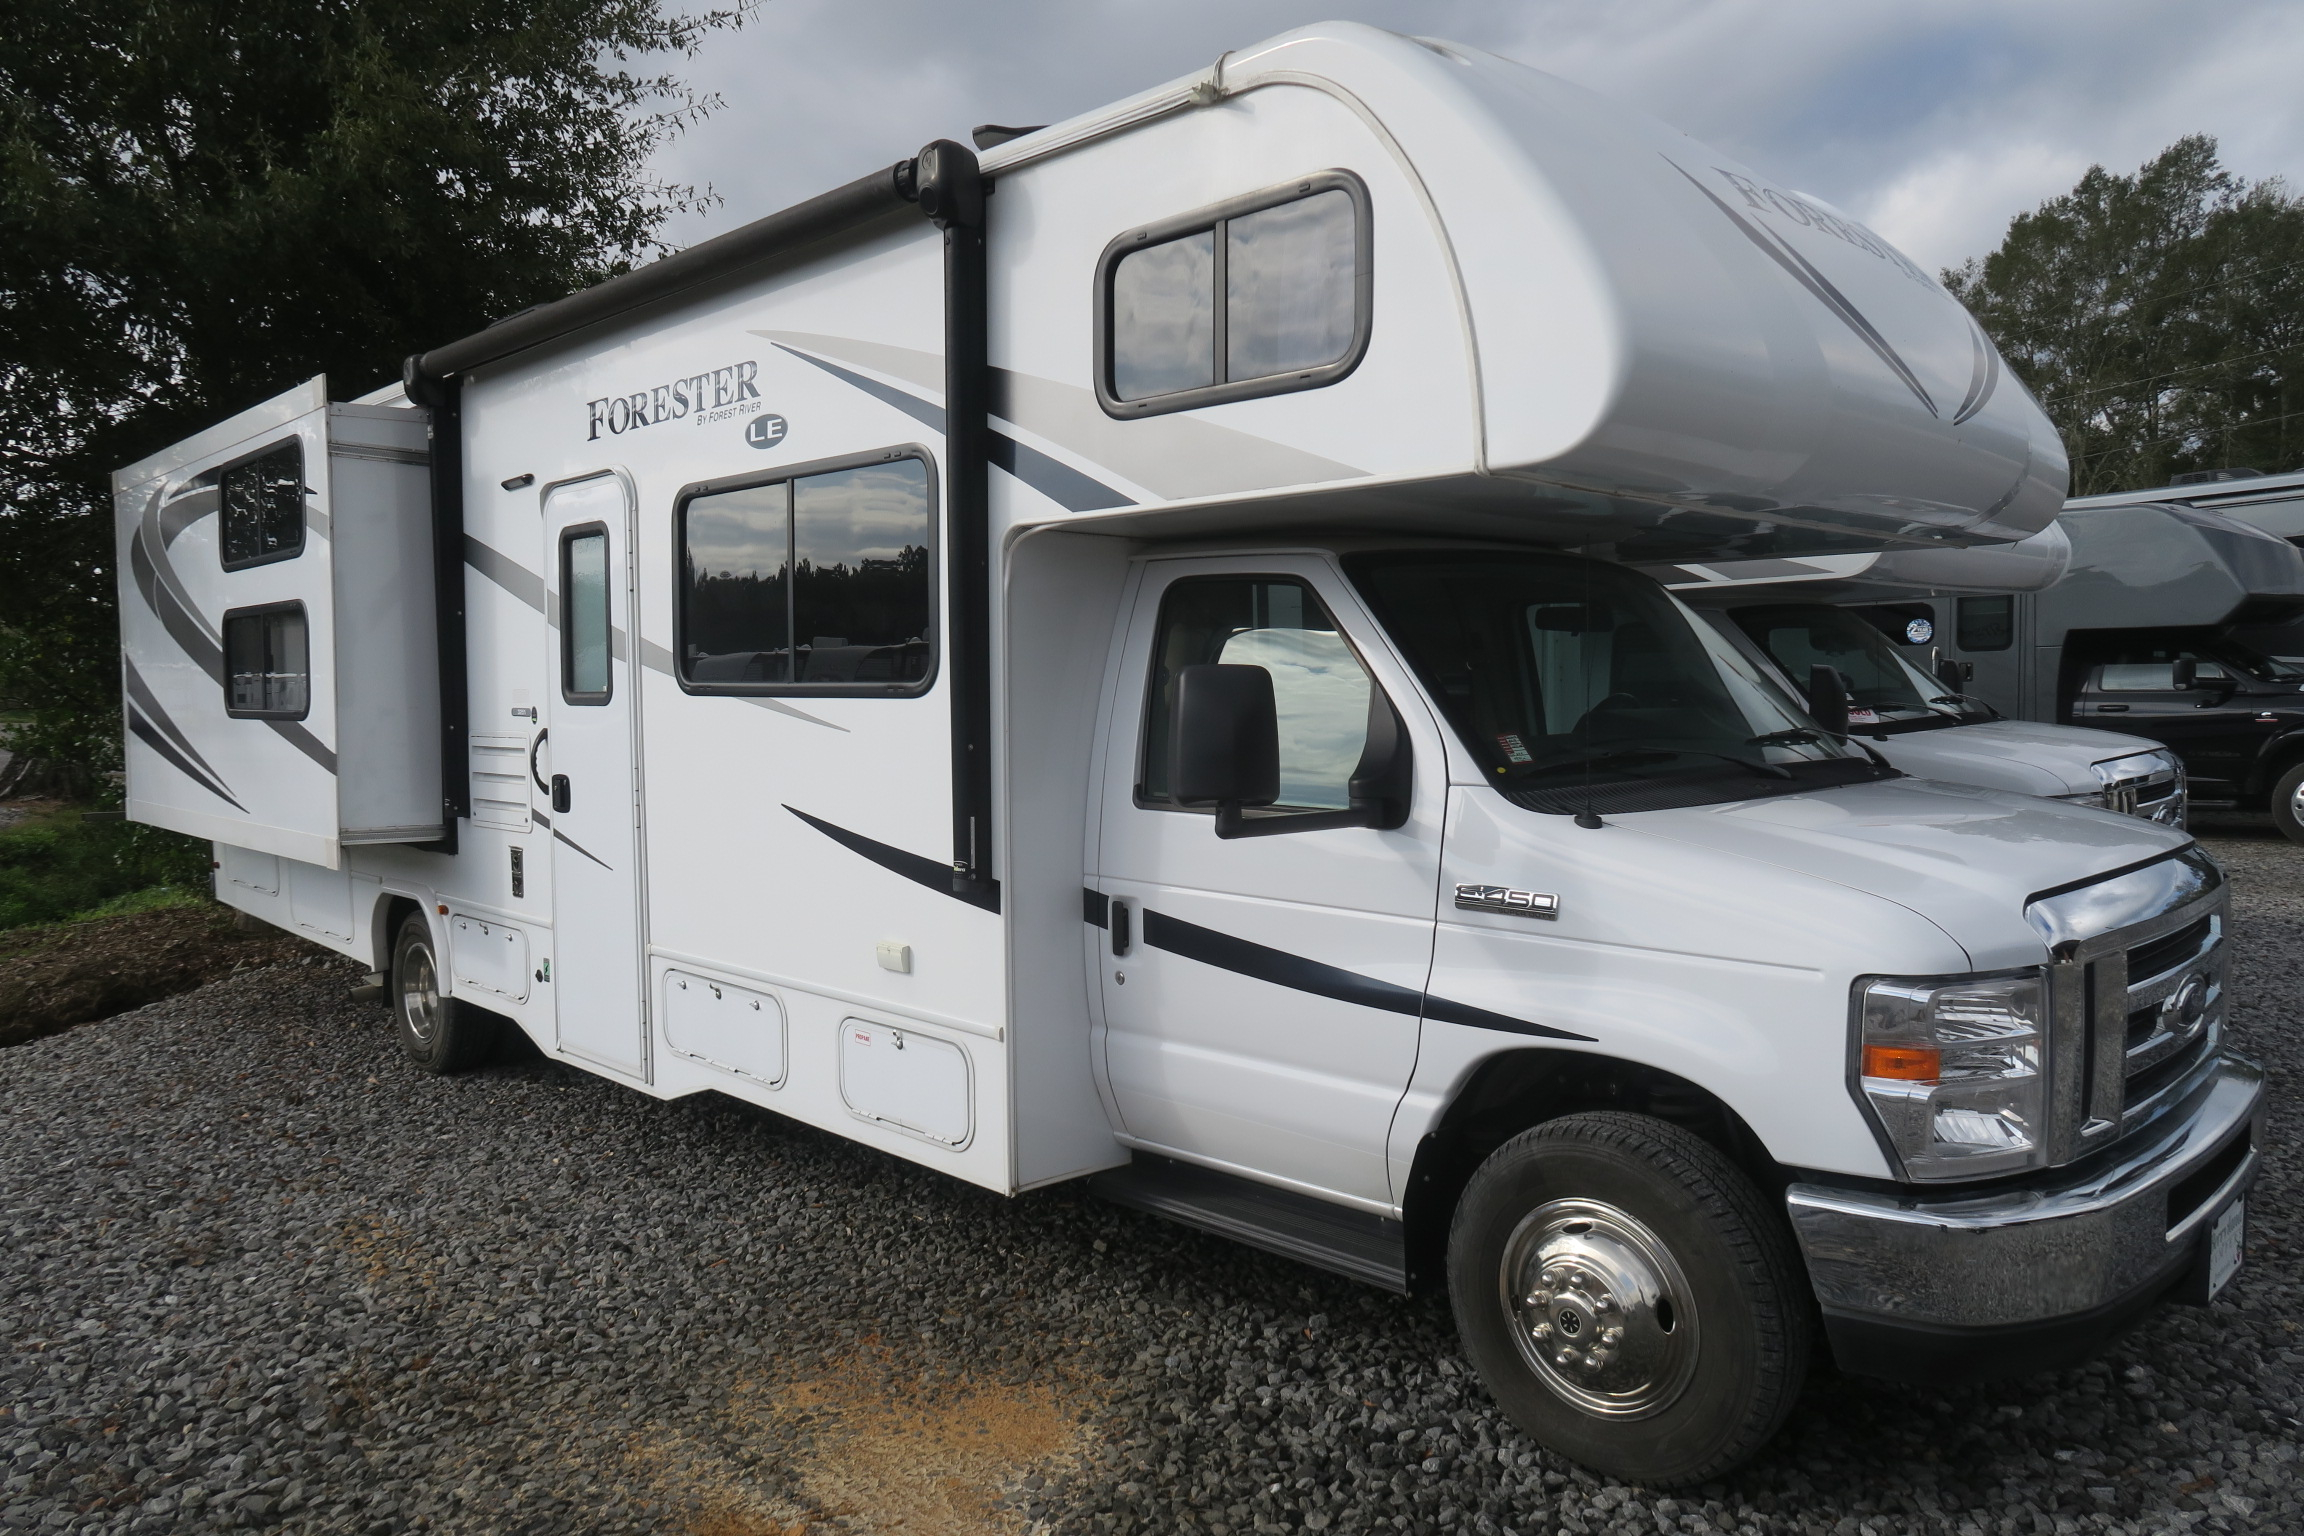 9. Used RVs for Sale Under $1000 Near Me - wide 4